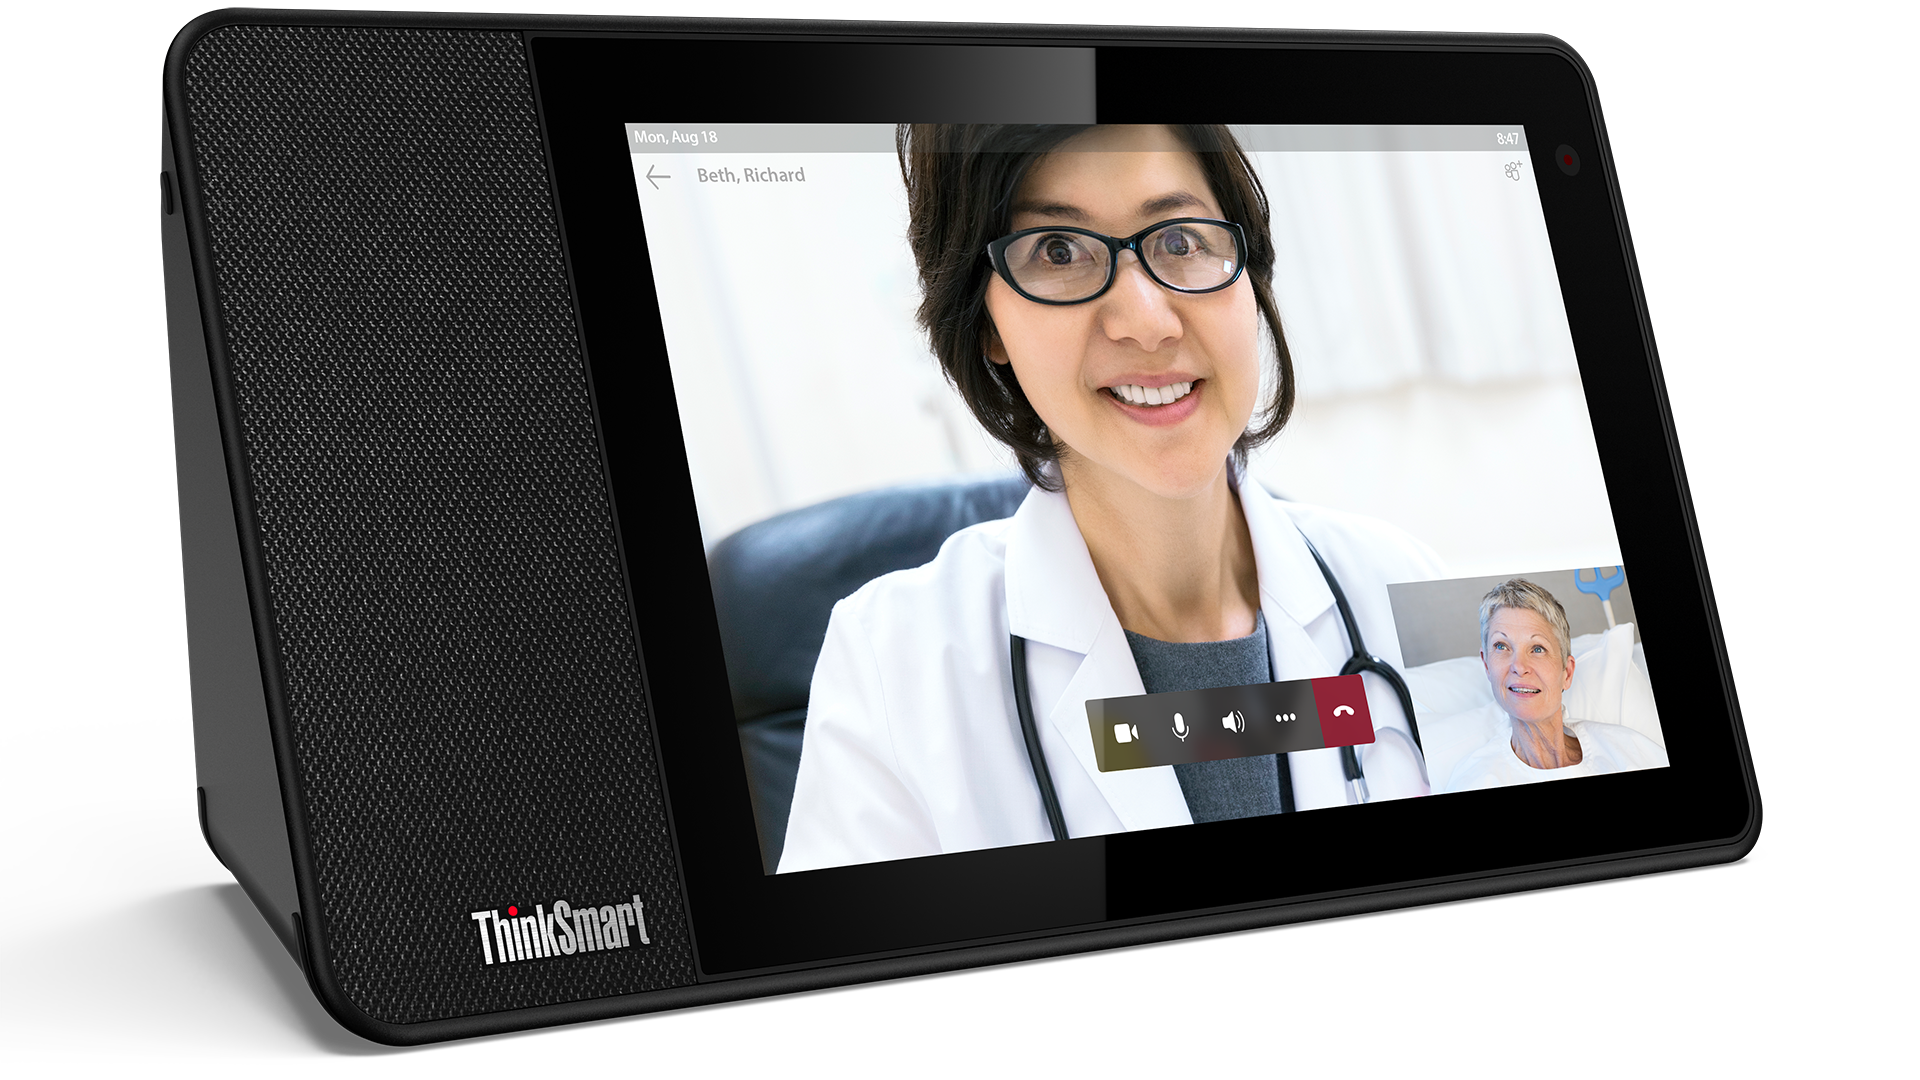 A patient communicates directly with her doctor using a ThinkSmart device